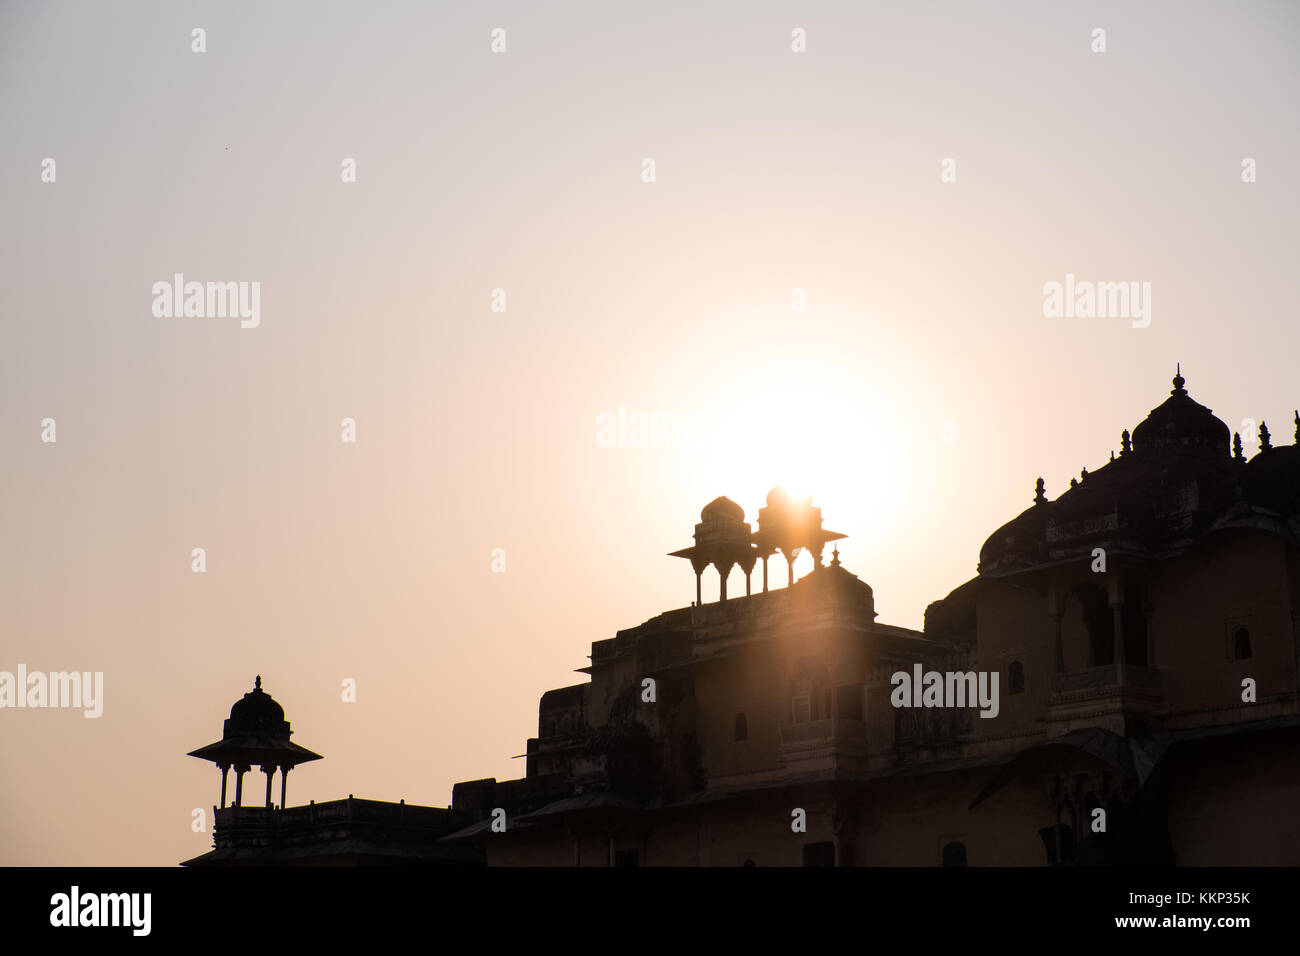 Turrets and cupolas of an Indian Palace aginst a sunset, Bundi, Rajasthan,India Stock Photo